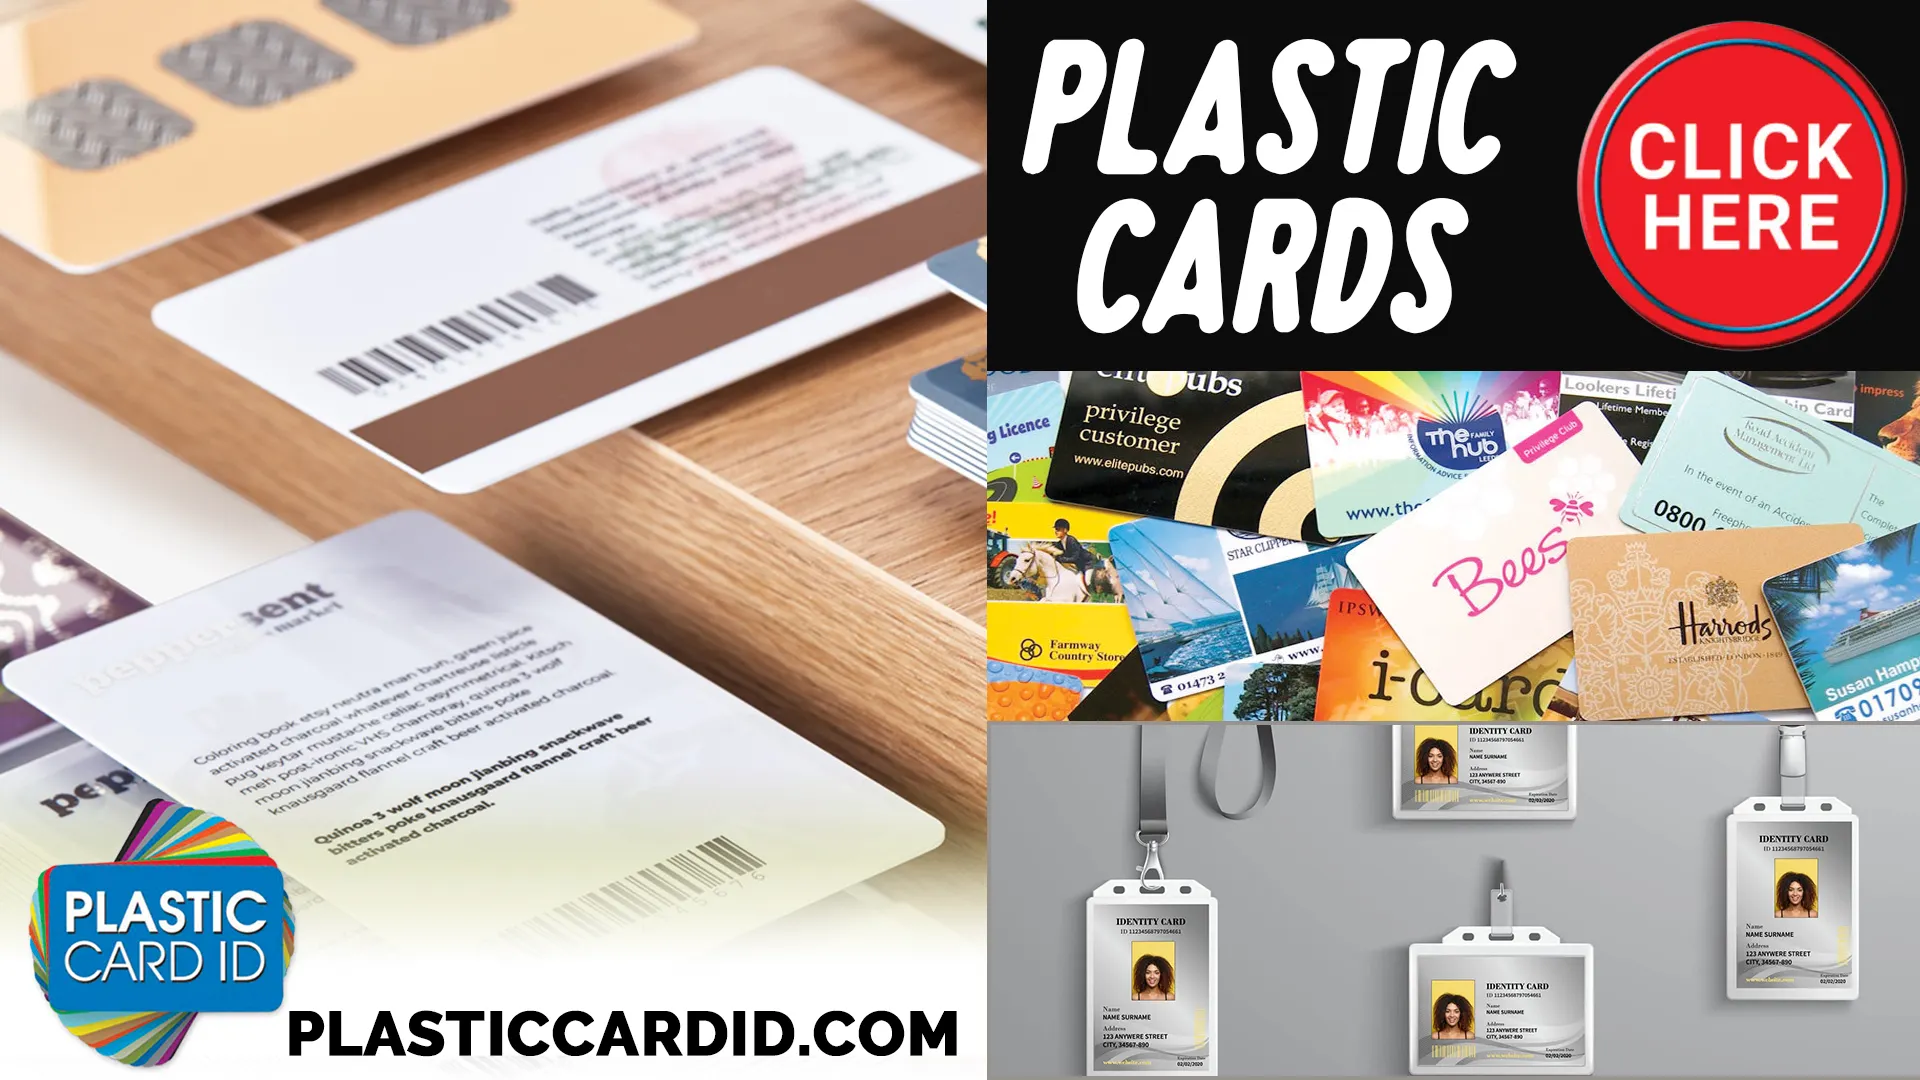 Supplies and Accessories for Your Card Needs